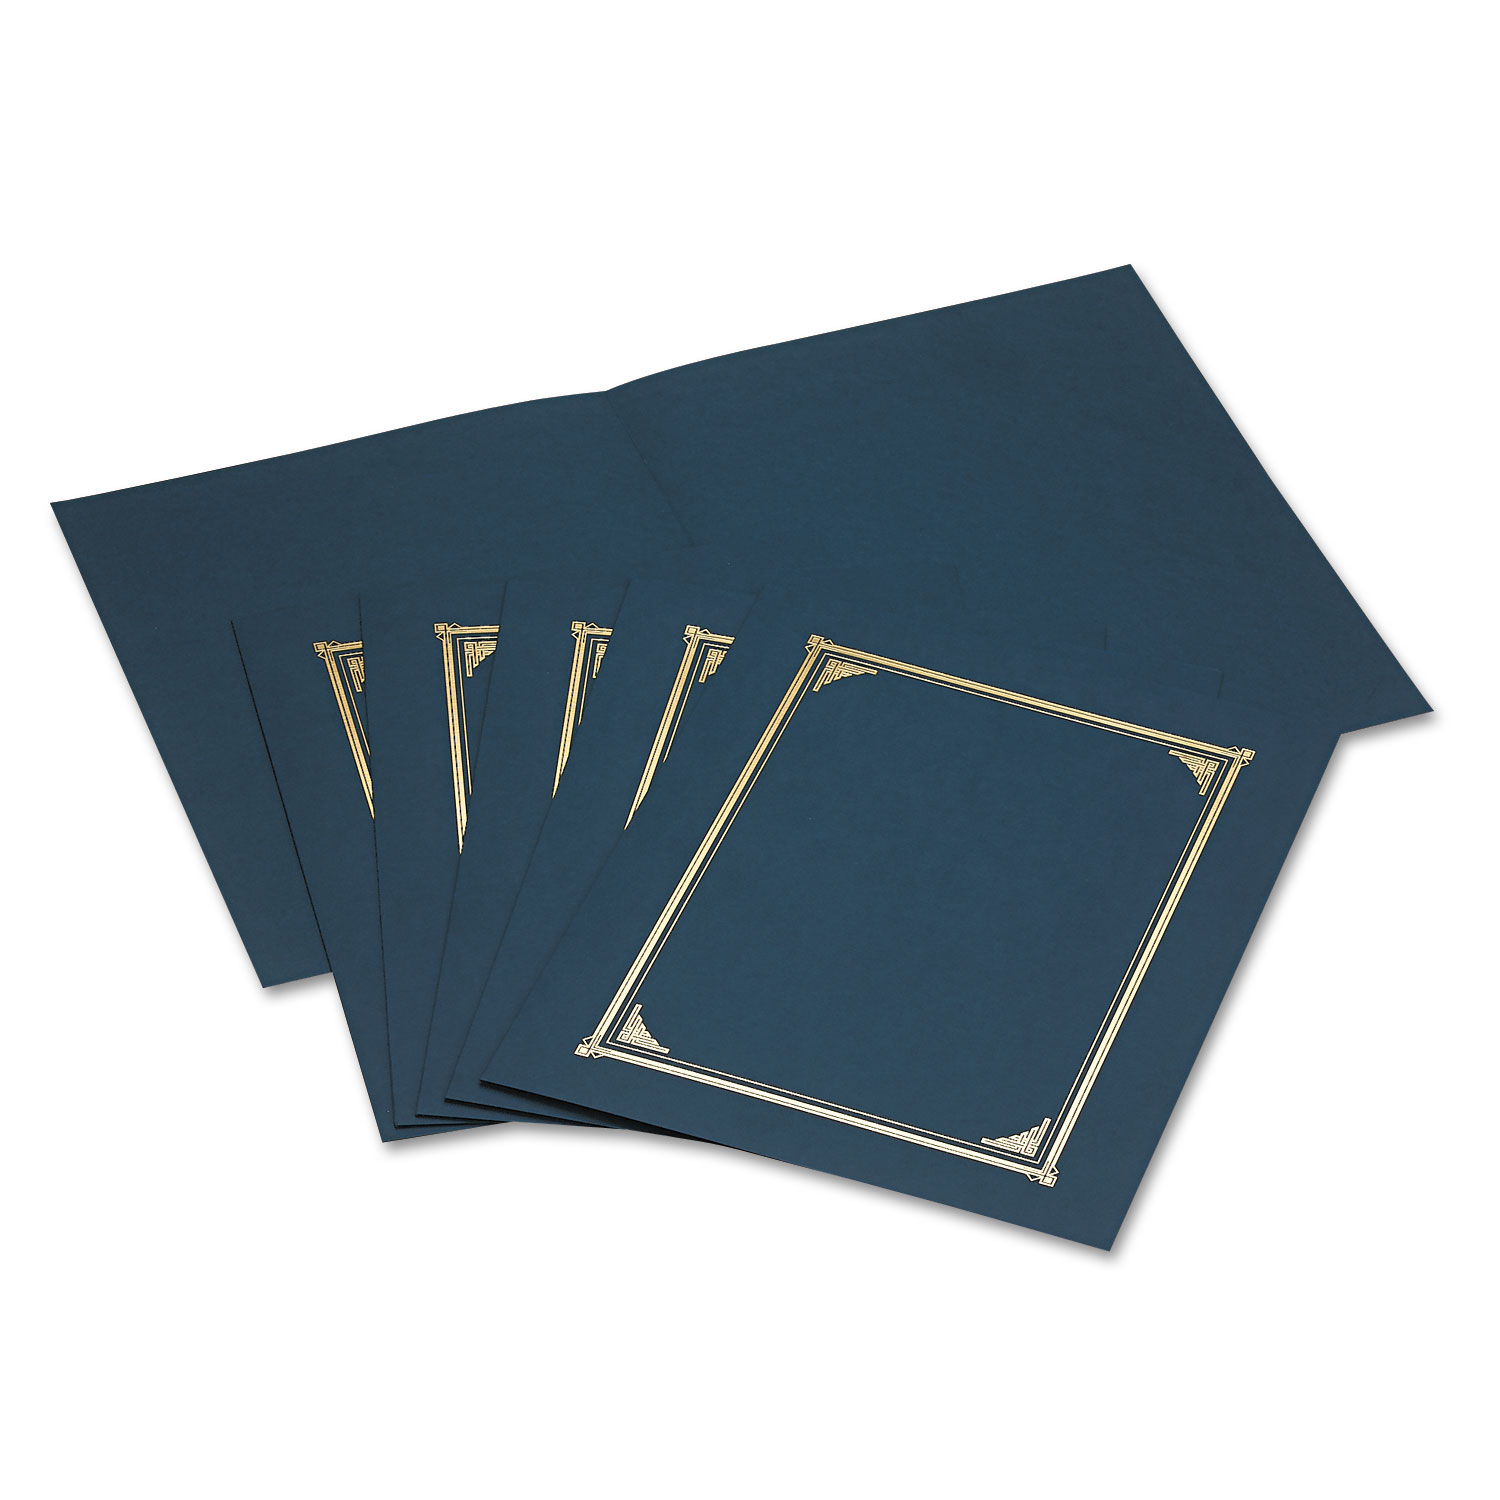 Certificate/Document Cover, 12 1/2 x 9 3/4, Navy Blue, 6/Pack